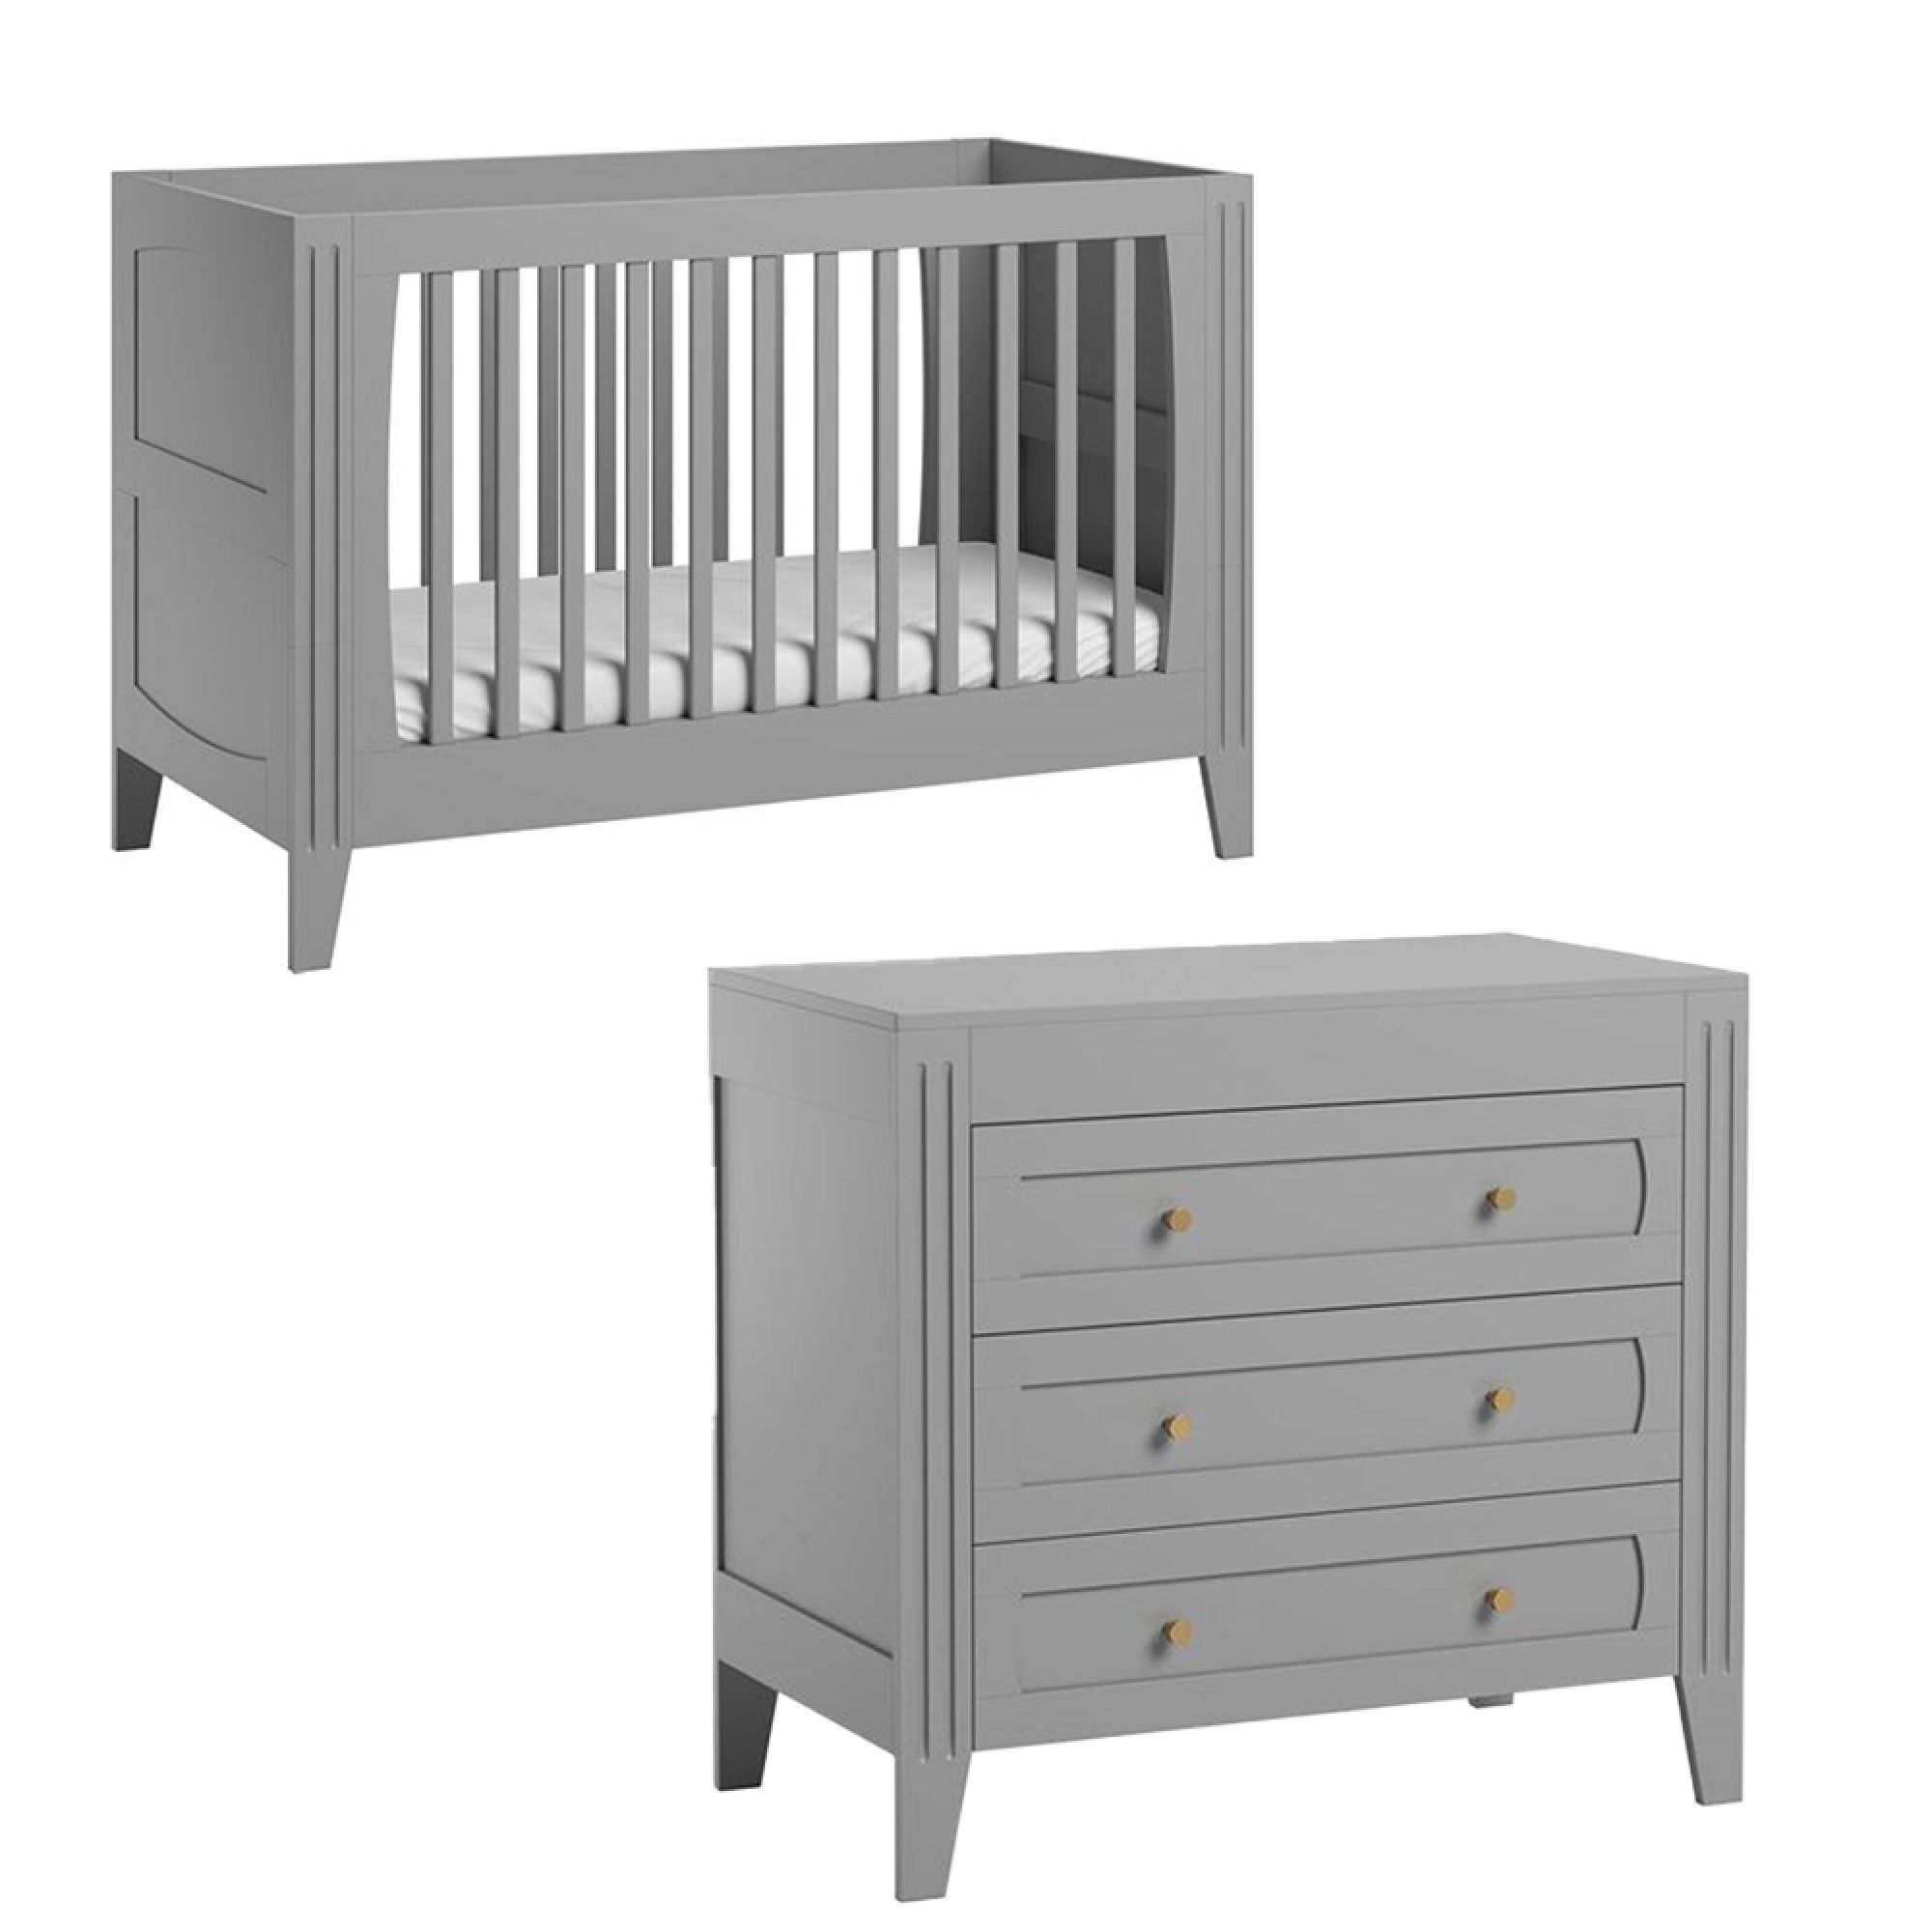 Chambre duo lit 70x140 + commode gris clair - Collection Milenne by Vox -  Made in Bébé